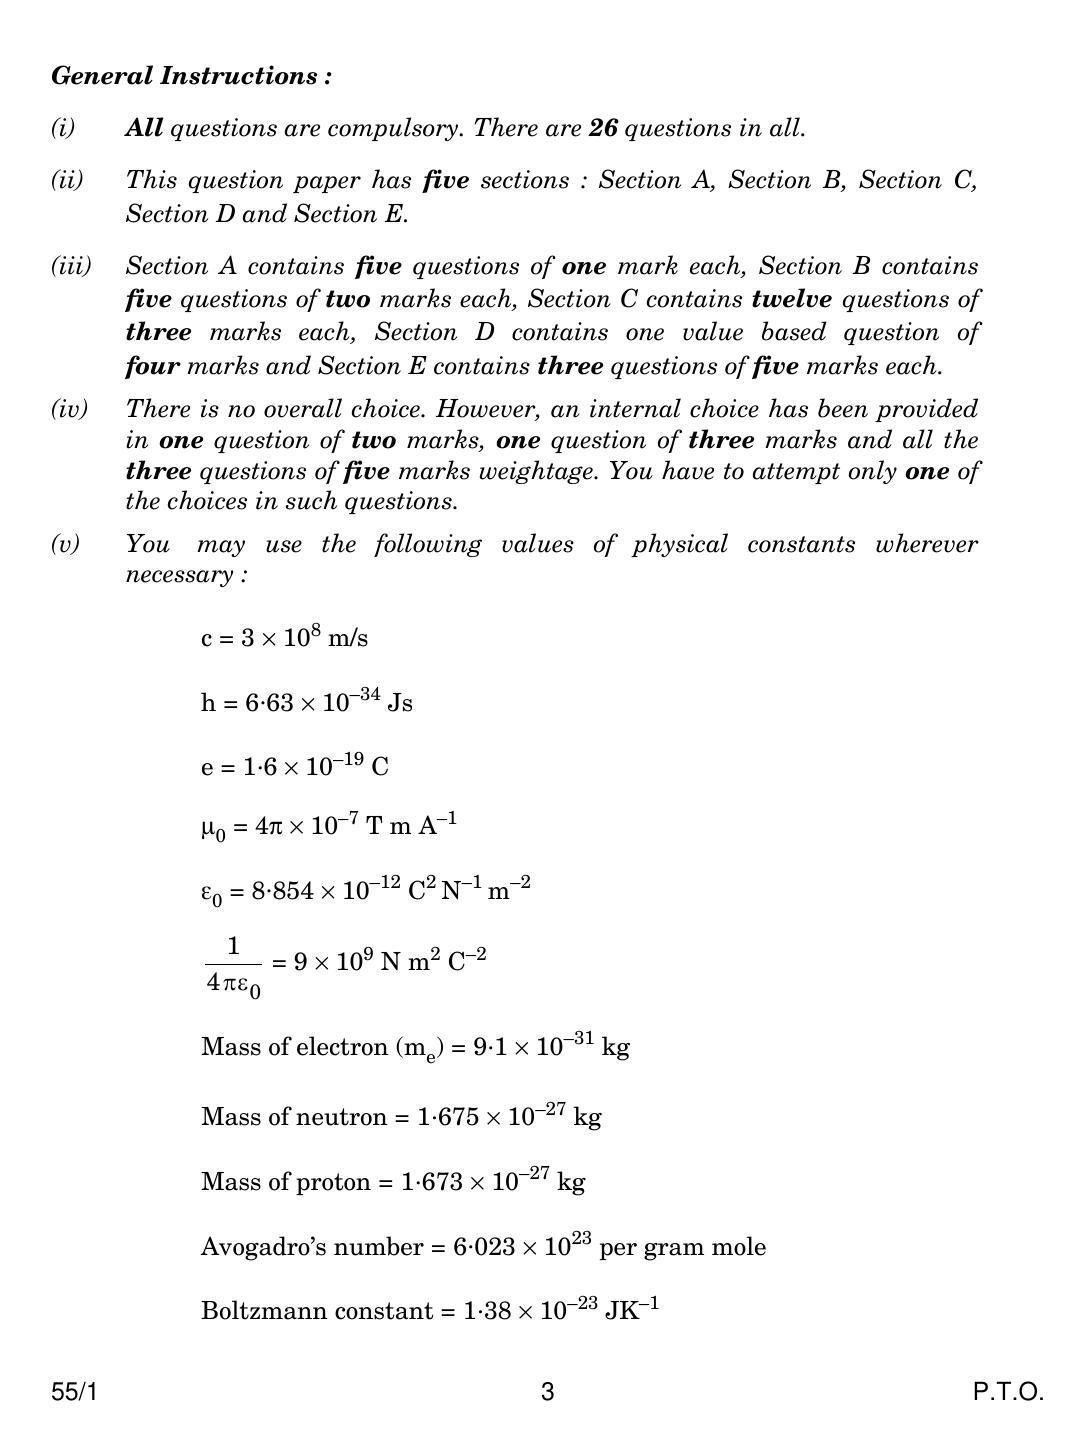 CBSE Class 12 55-1 PHYSICS 2018 Question Paper - Page 3